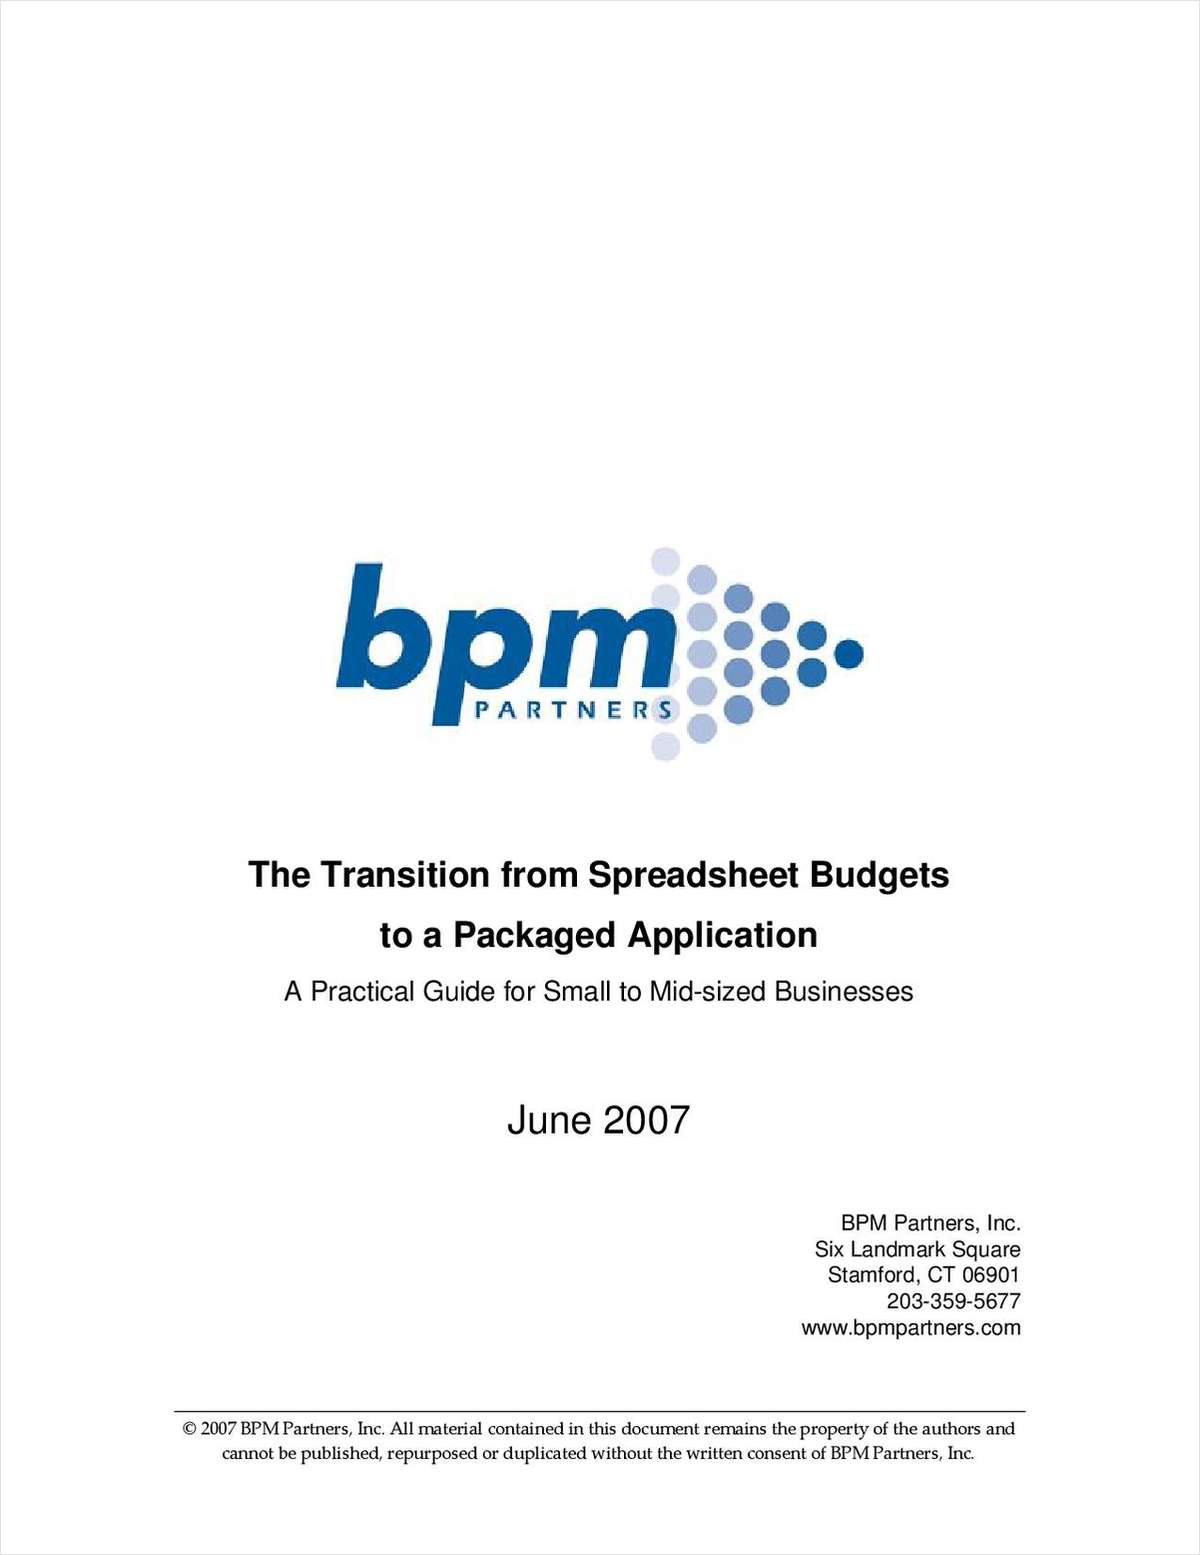 The Transition from Spreadsheet Budgets to a Packaged Application: A Practical Guide for Small to Mid-sized Businesses